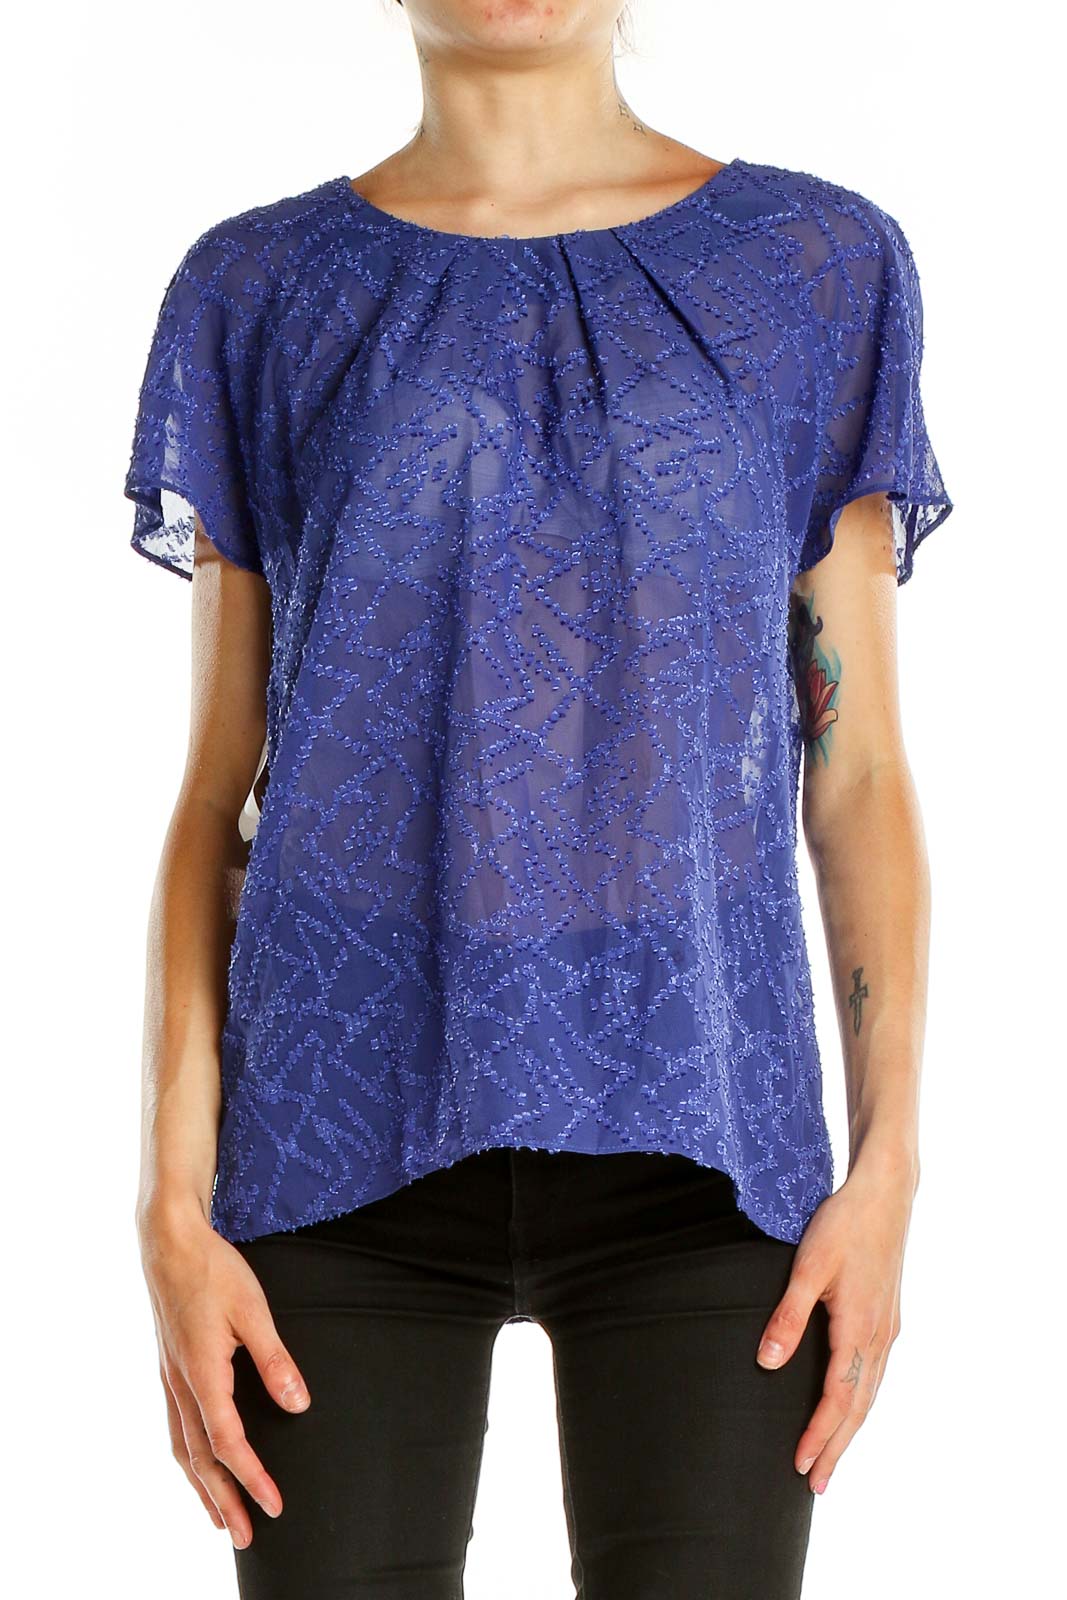 Blue Textured Semi-Sheer Blouse Front